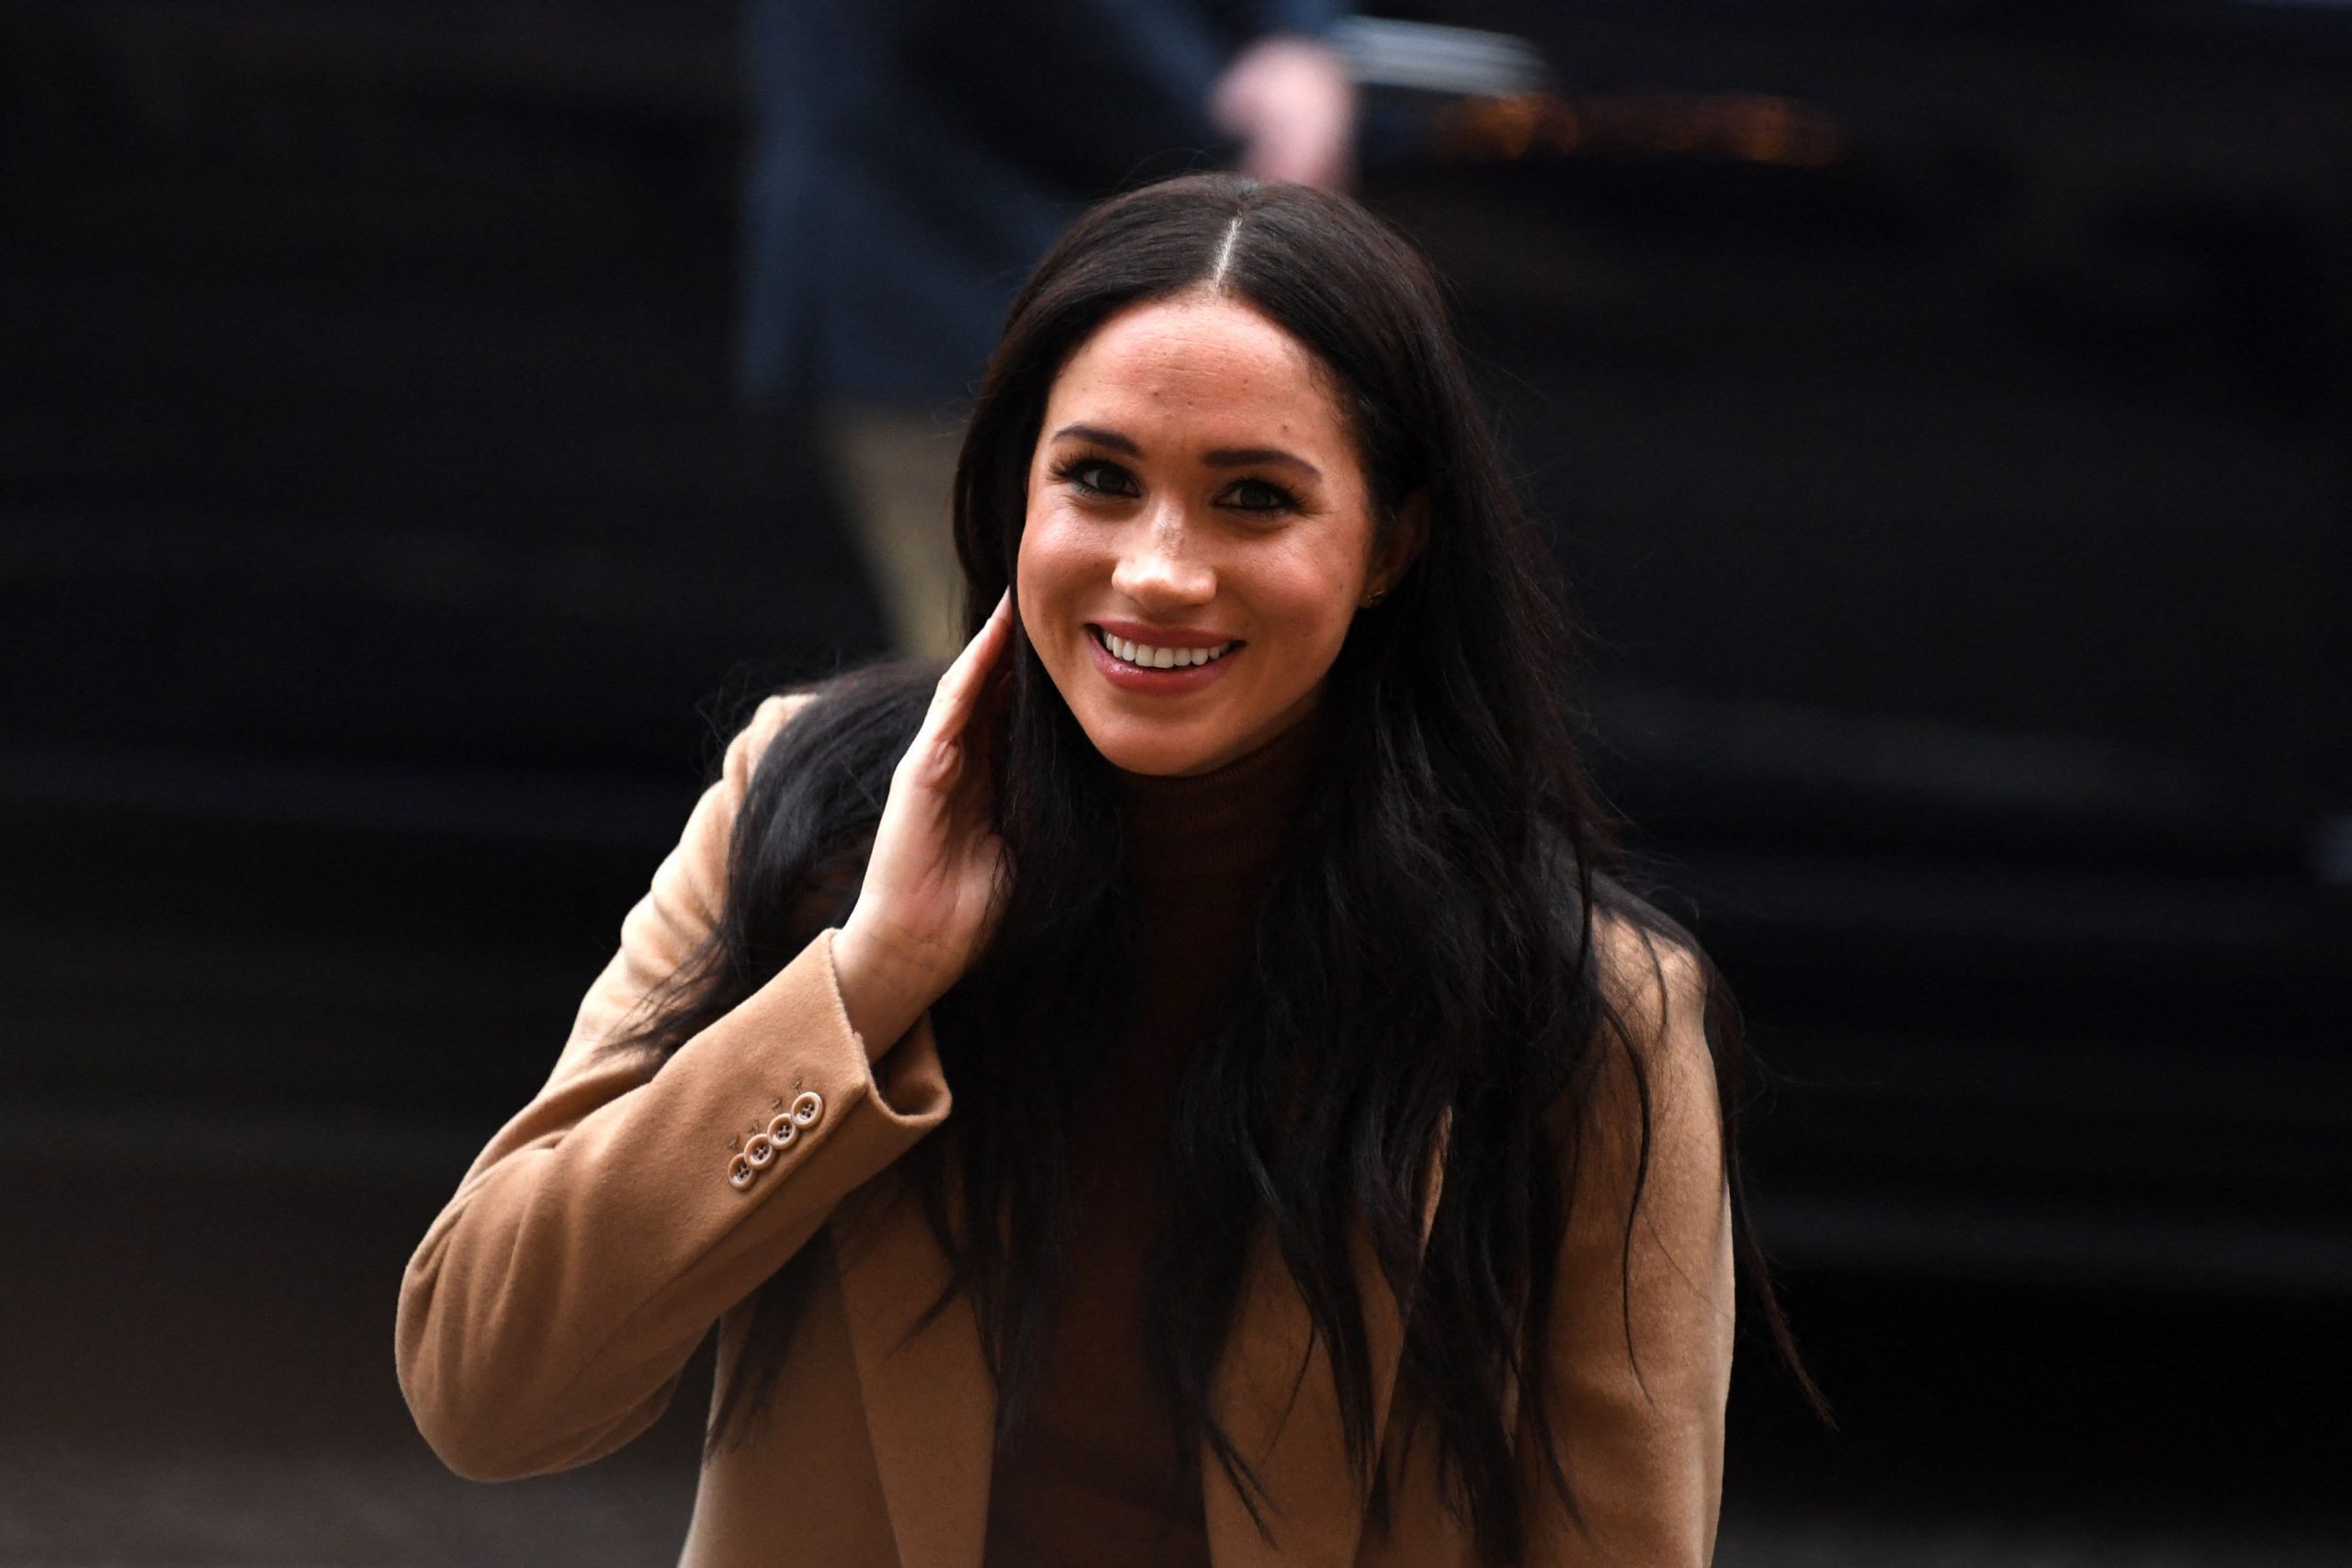 How the Royal Family wished Meghan Markle on her 40th birthday